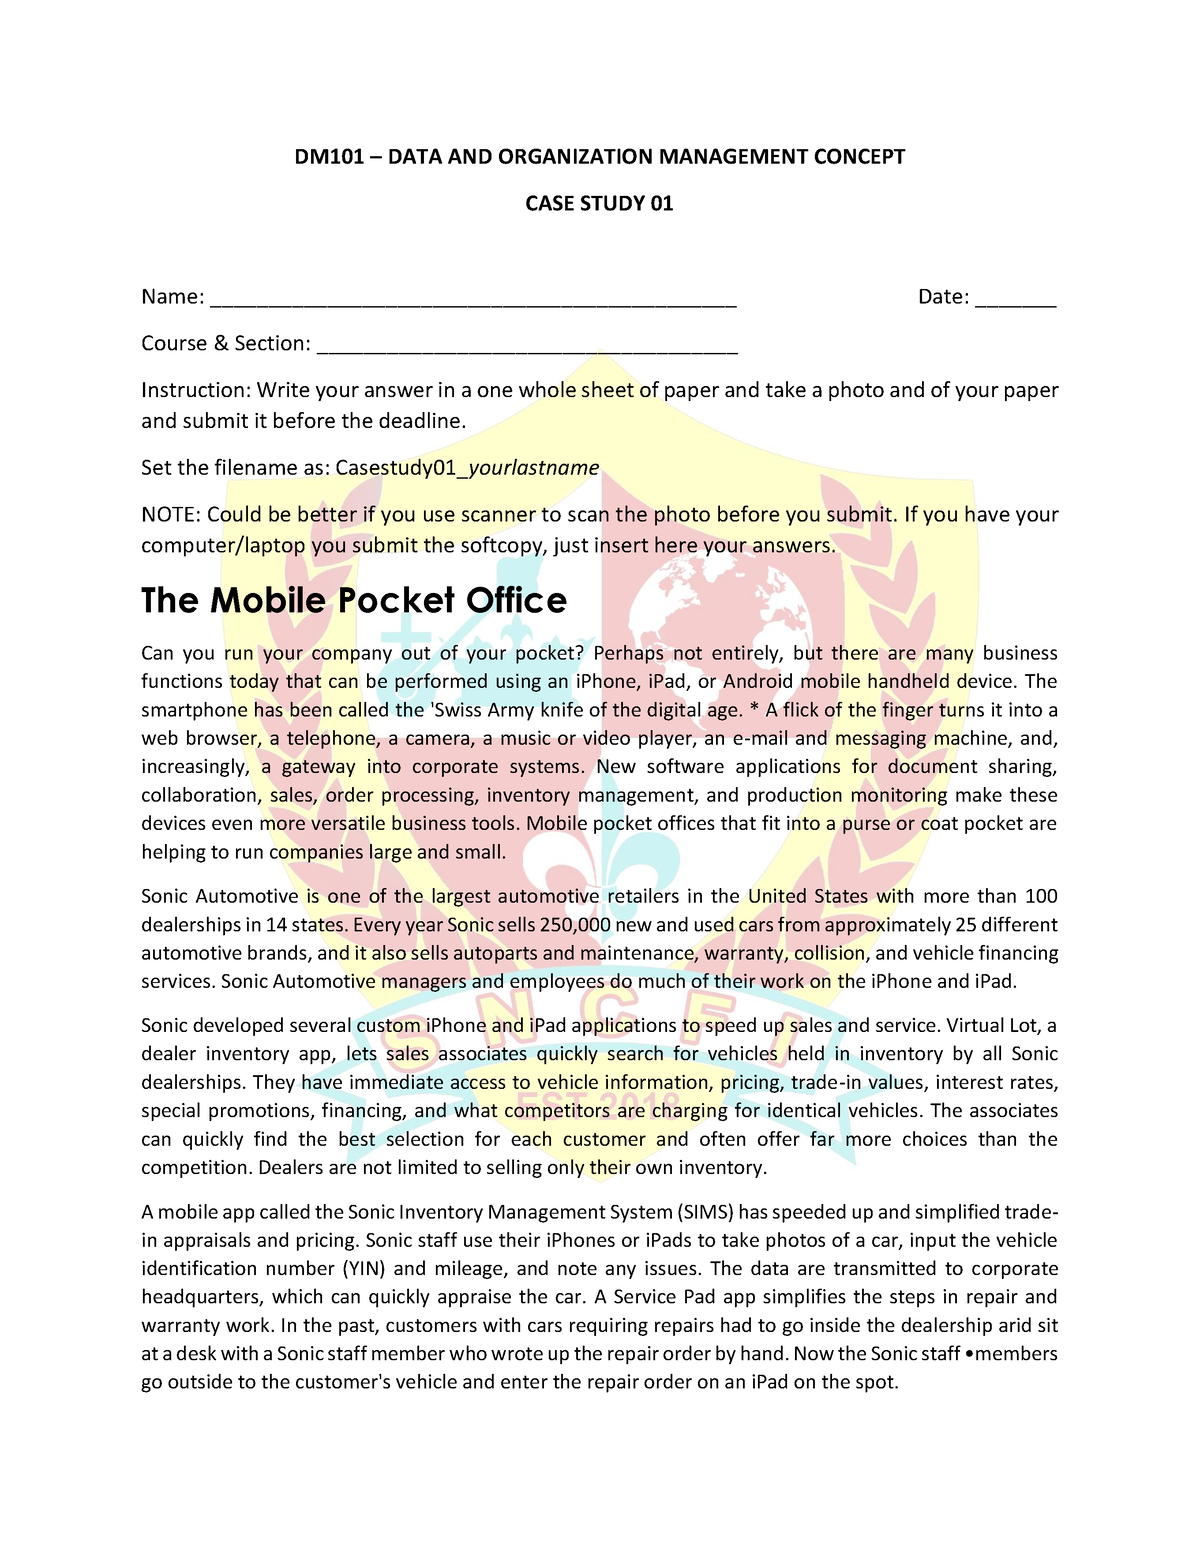 case study 1 the mobile pocket office